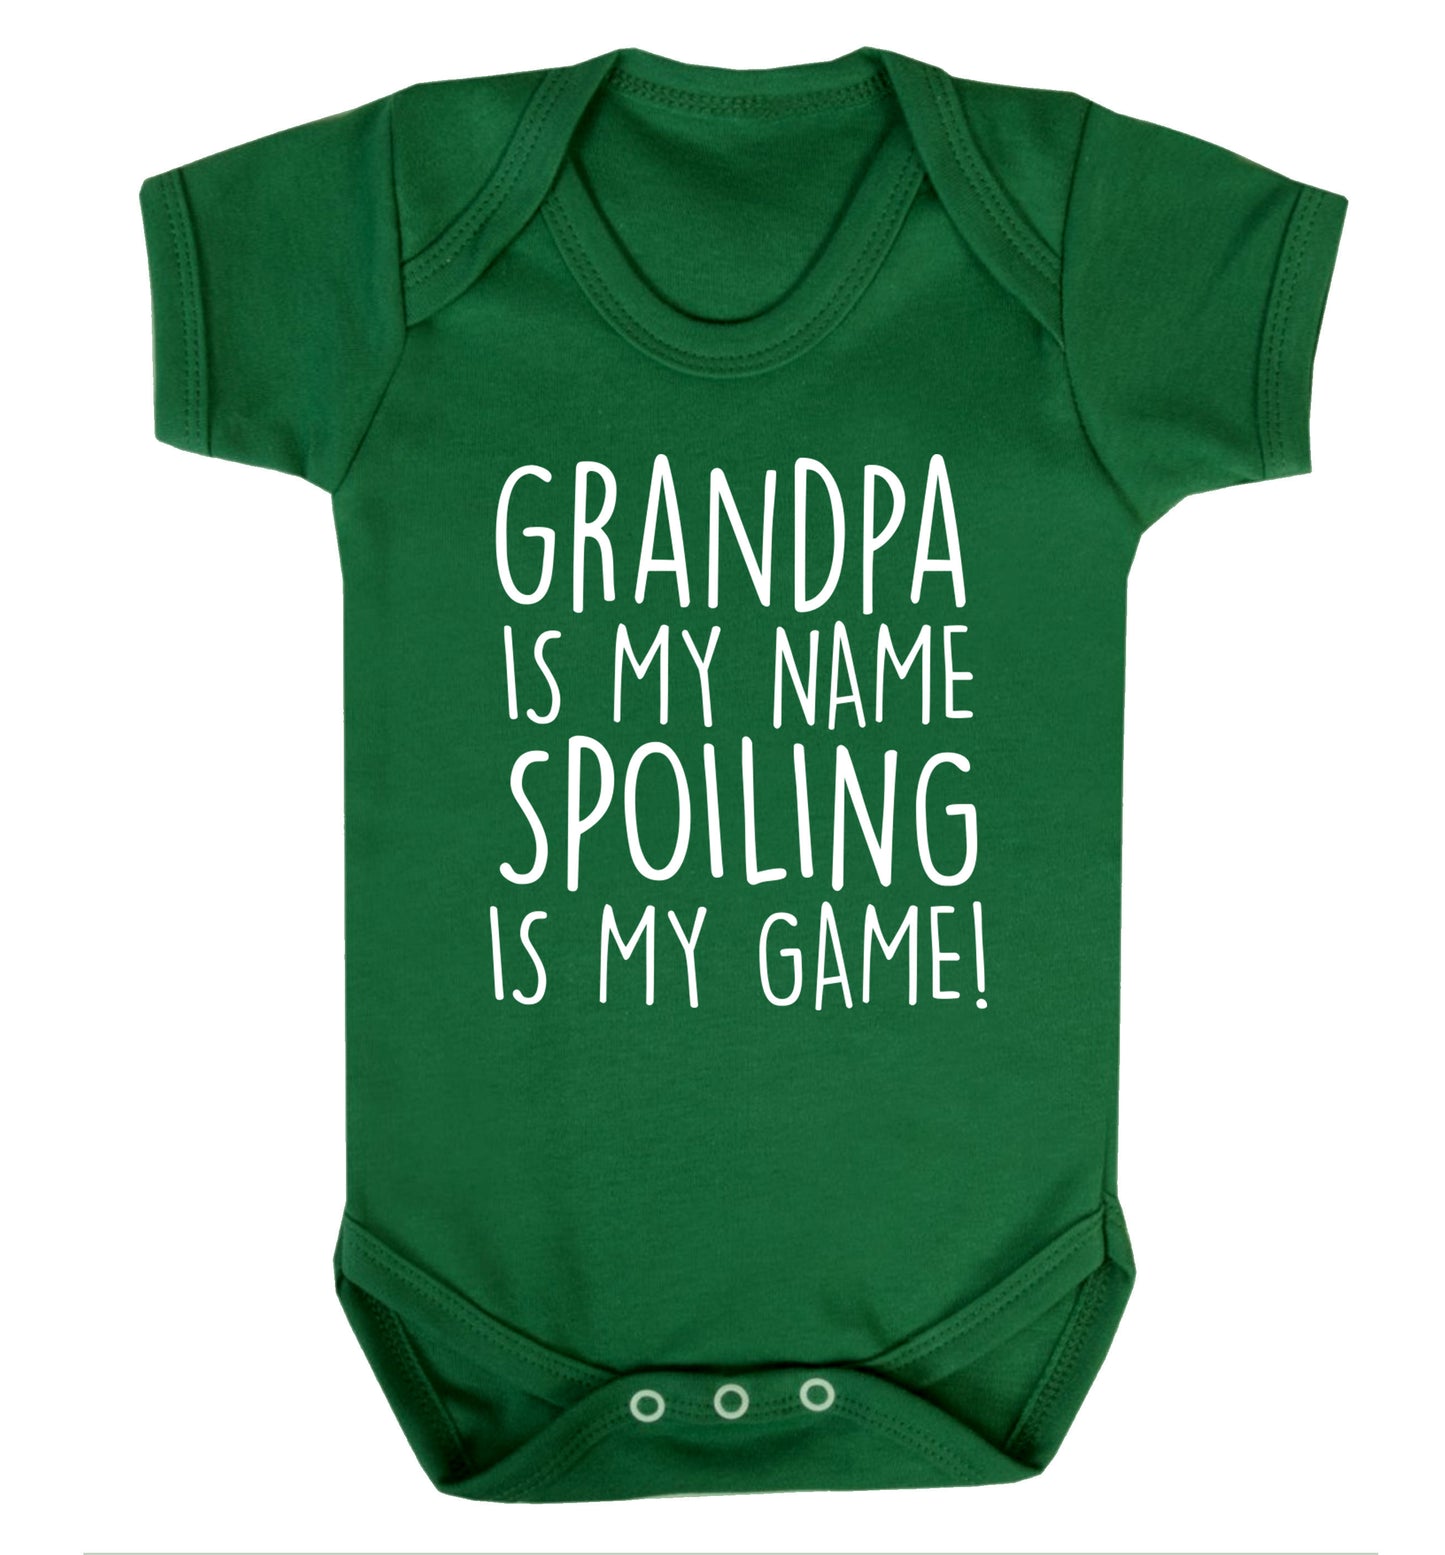 Grandpa is my name, spoiling is my game Baby Vest green 18-24 months